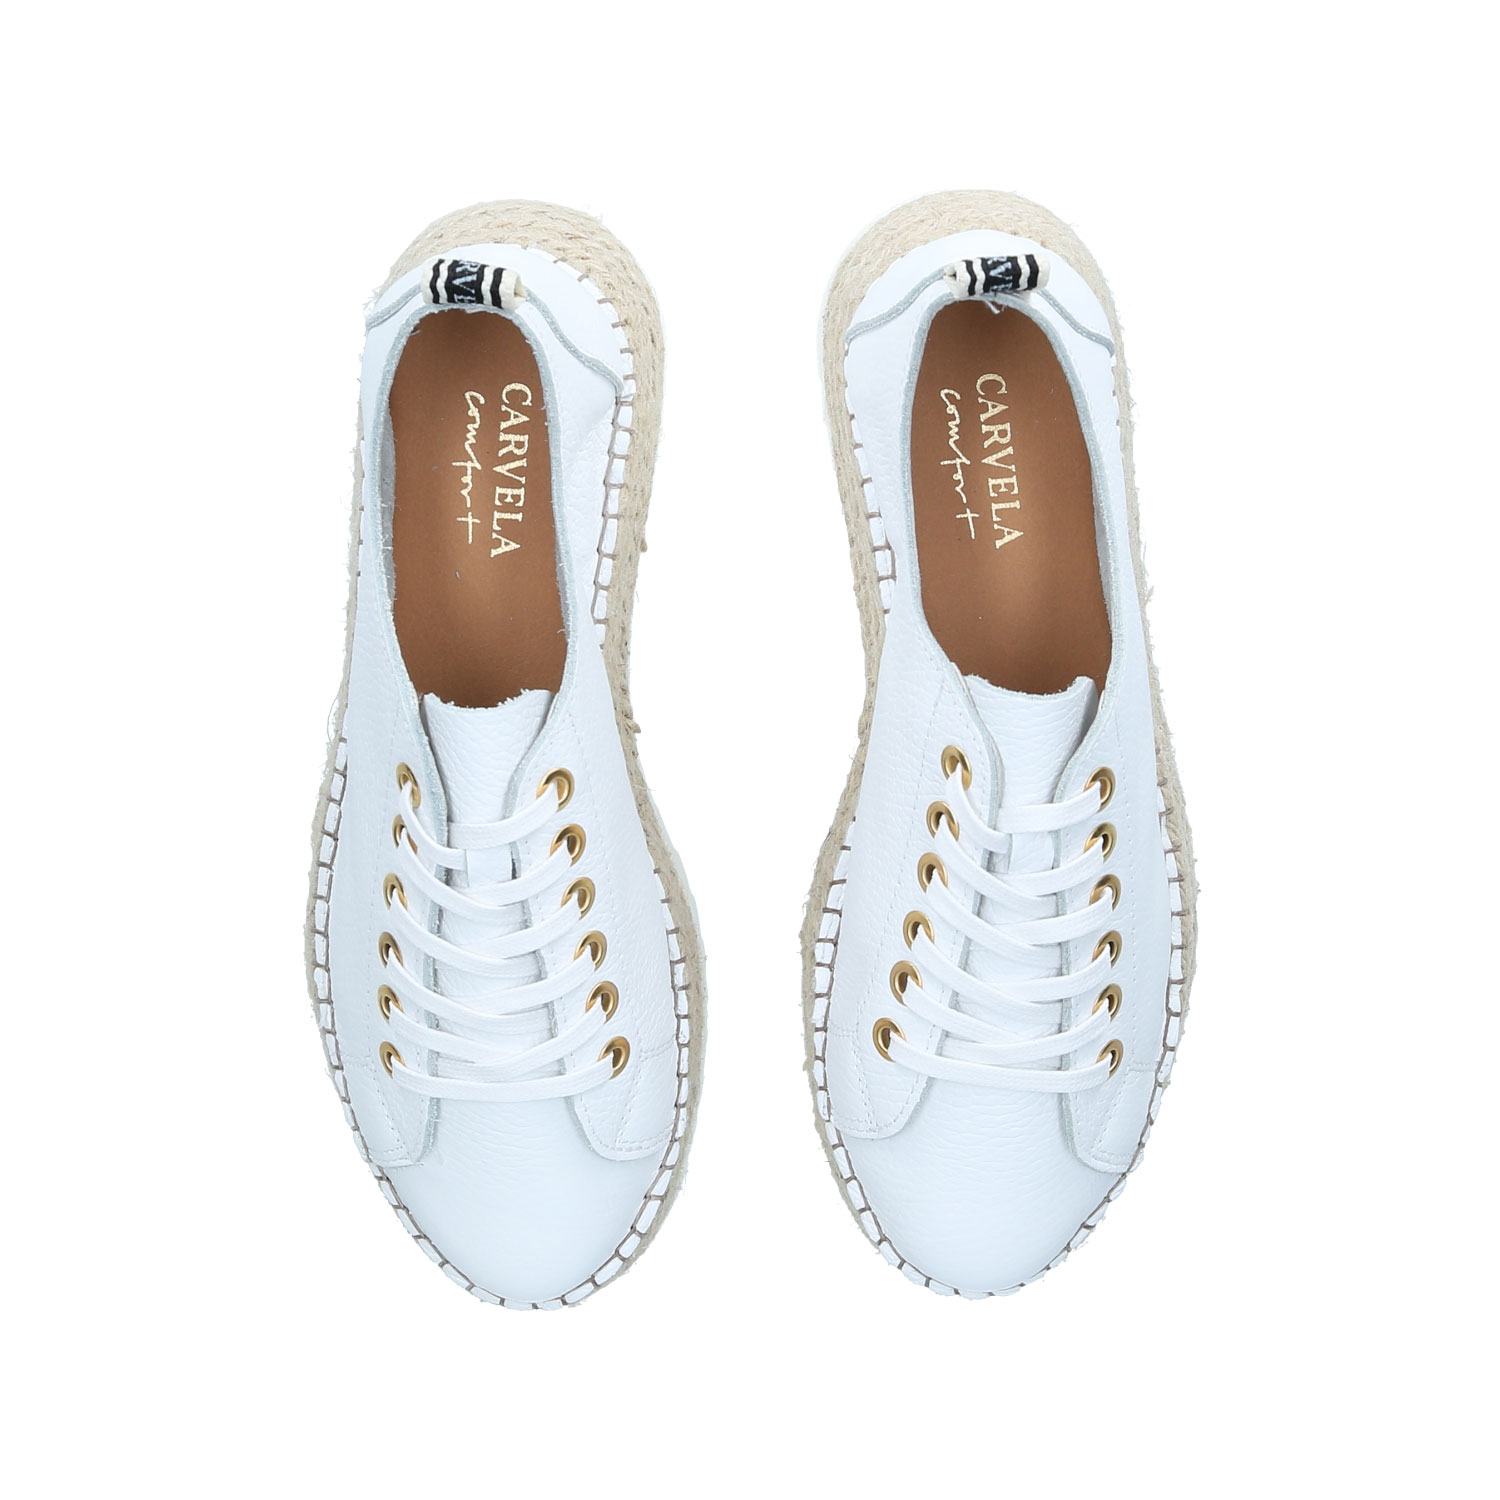 Chase Leather Espadrilles